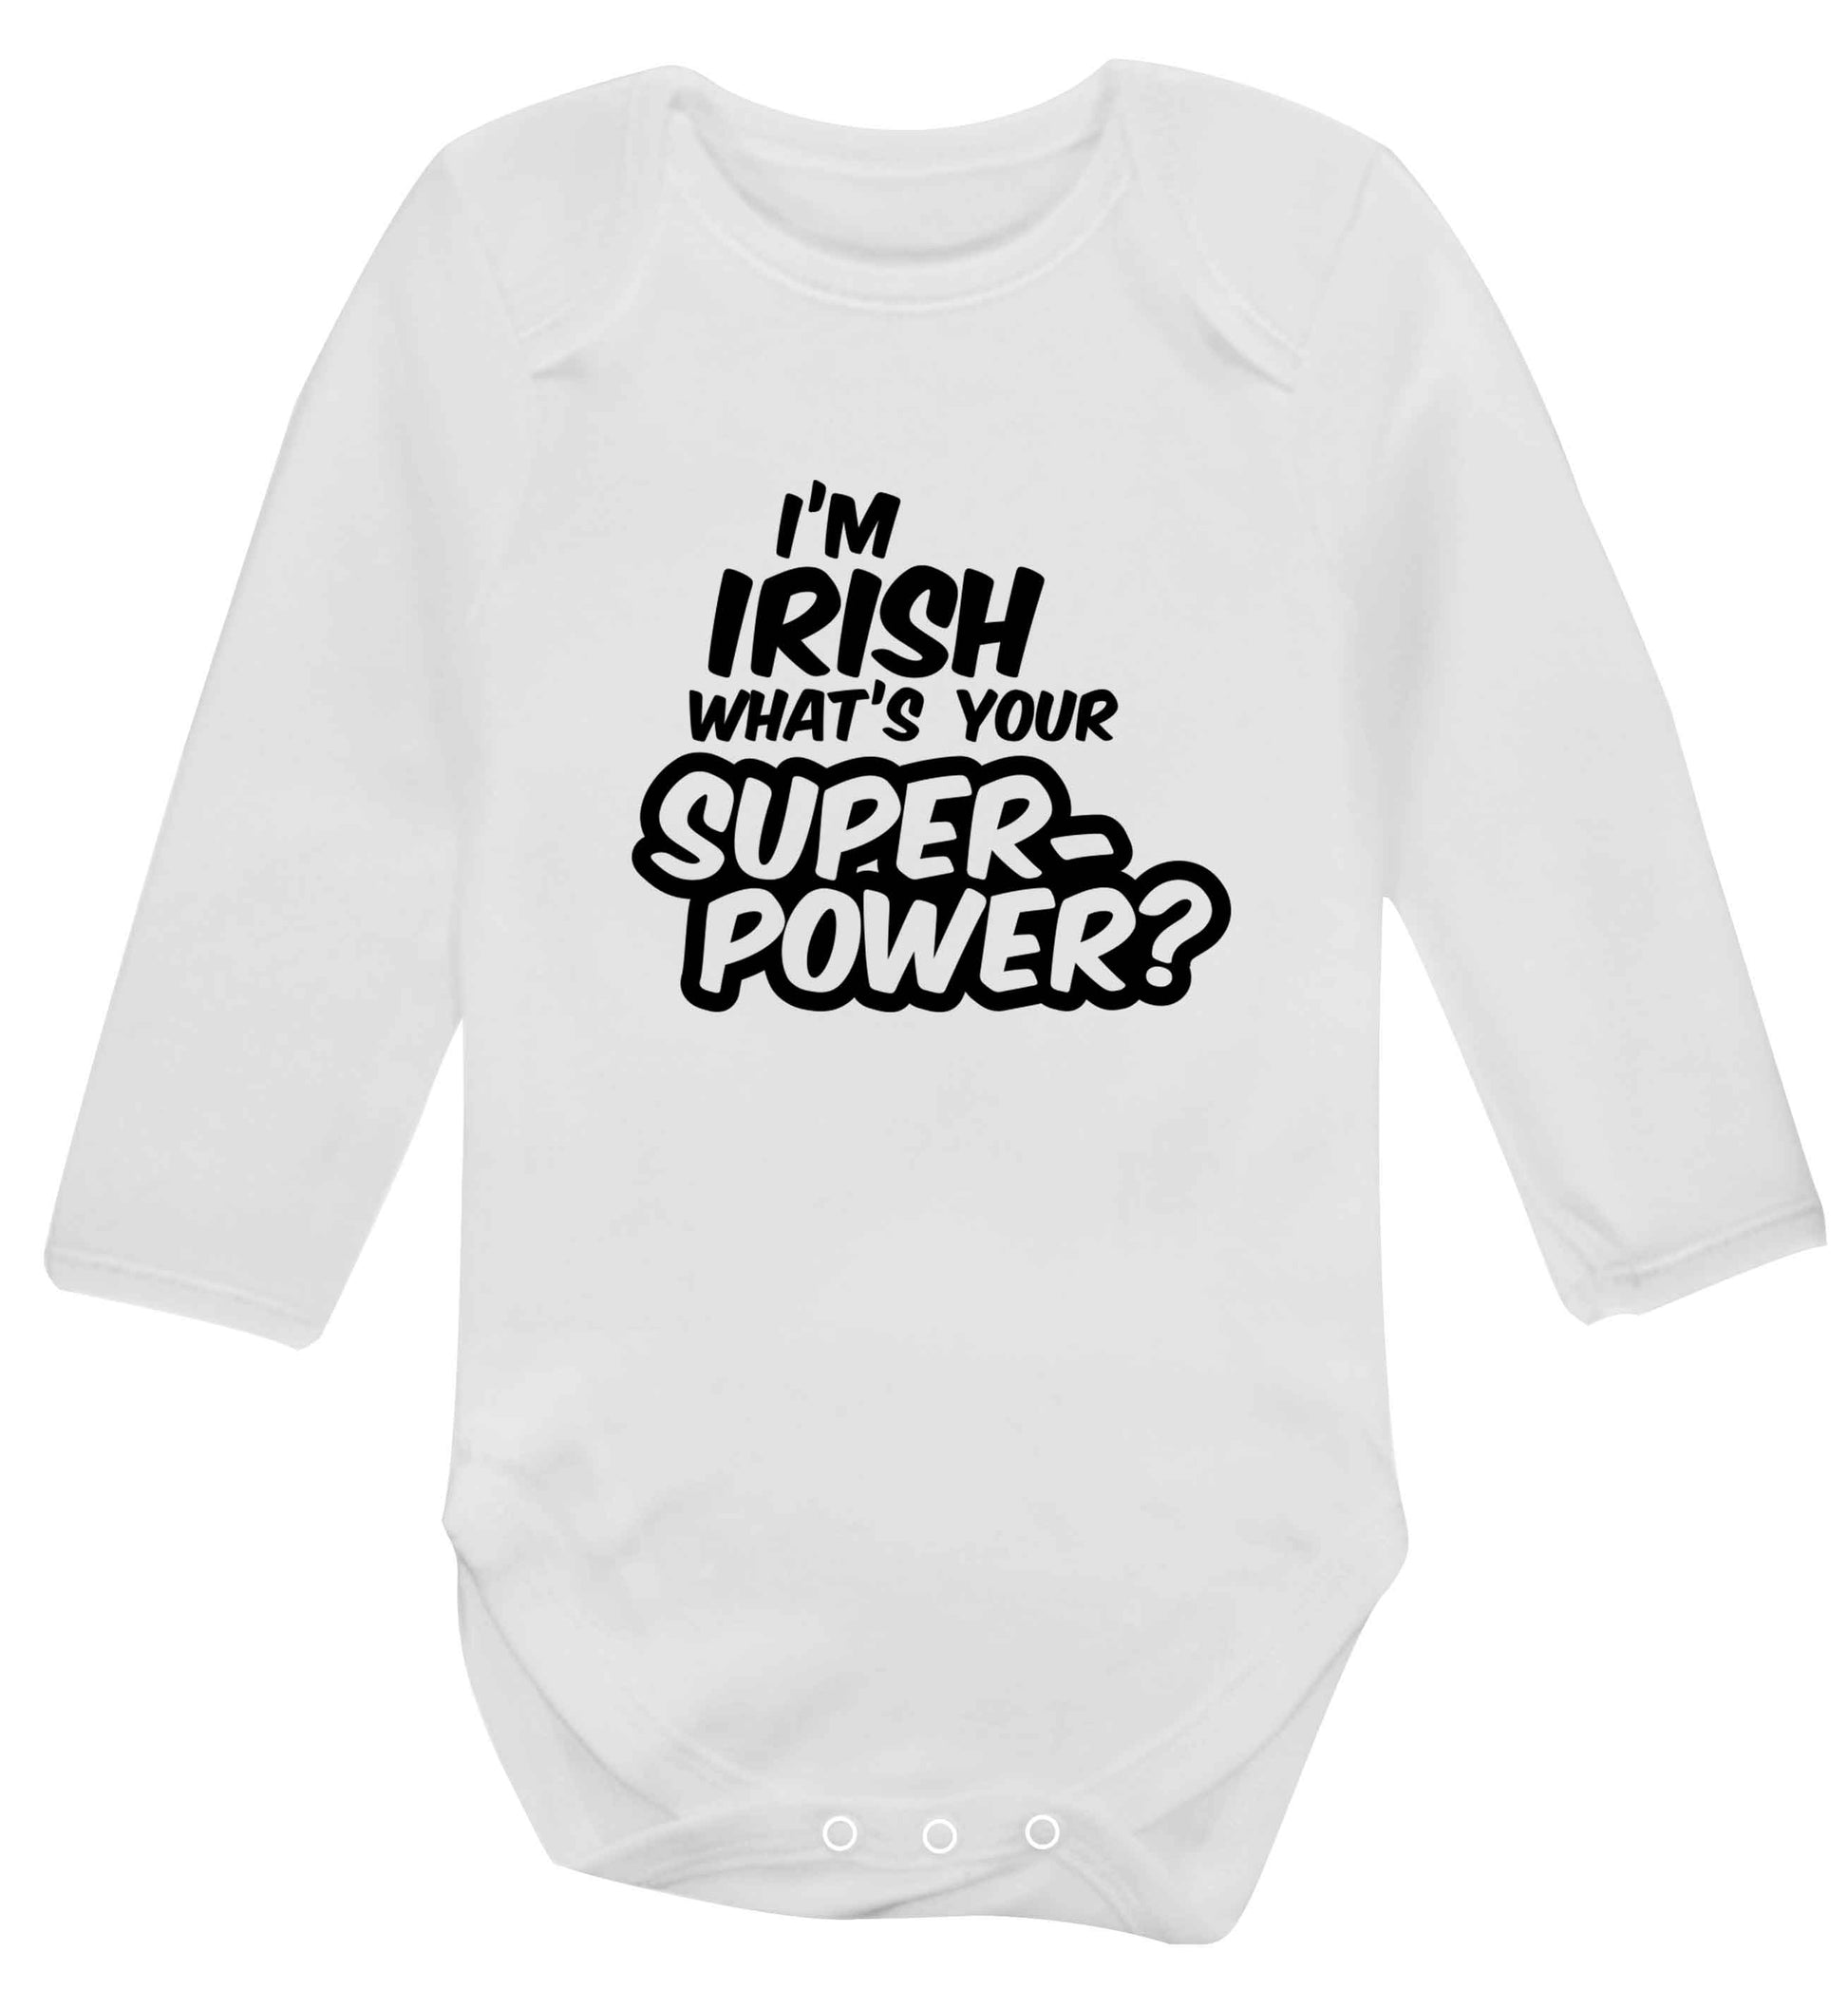 I'm Irish what's your superpower? baby vest long sleeved white 6-12 months